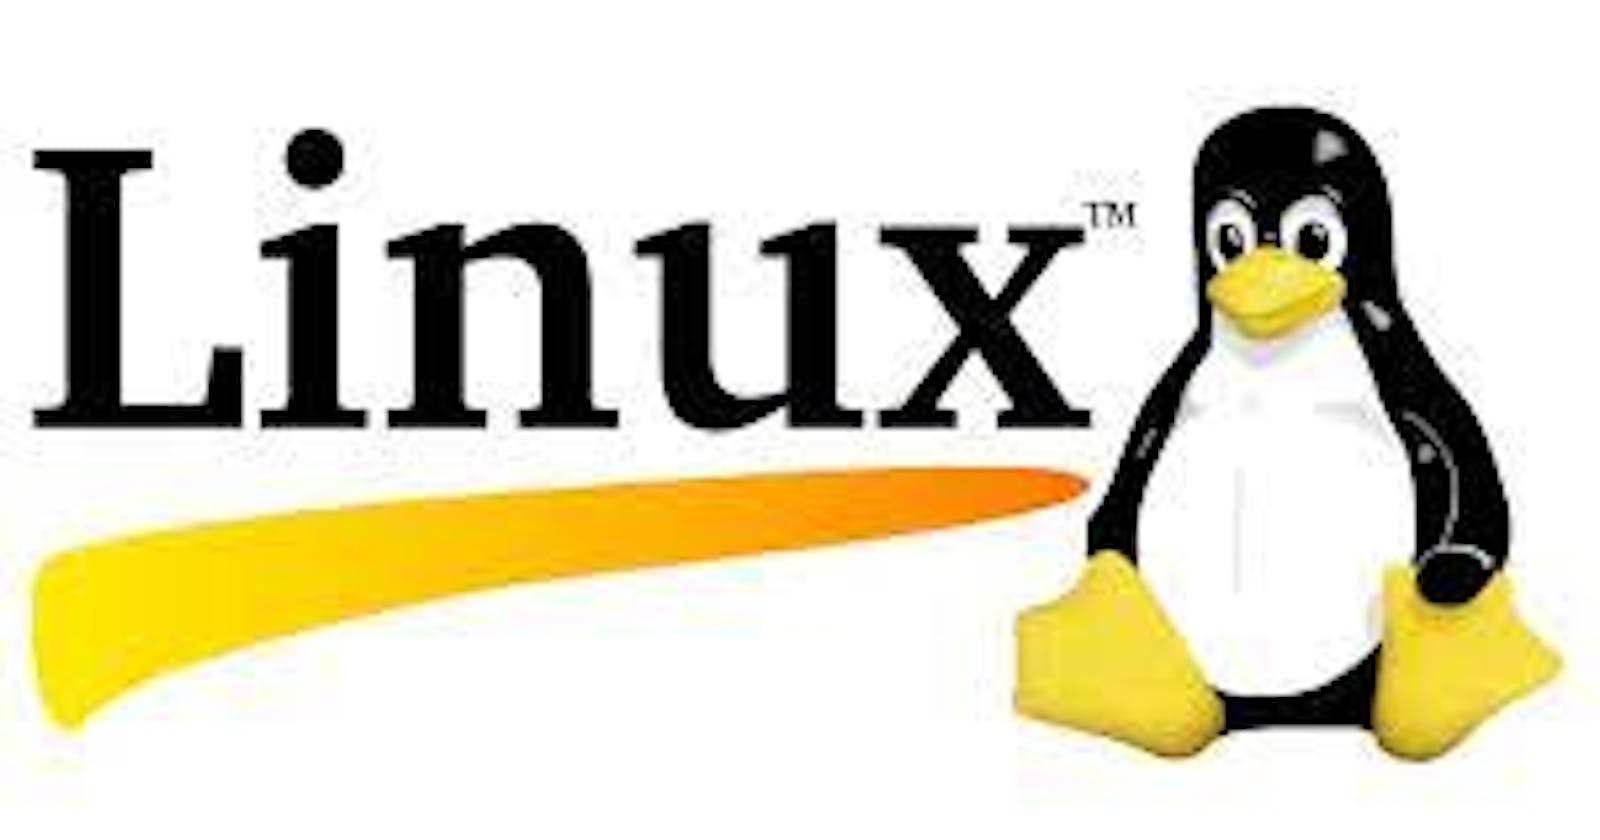 DAY-2|DEVOPS JOURNEY:
 Lets learn about Linux OS